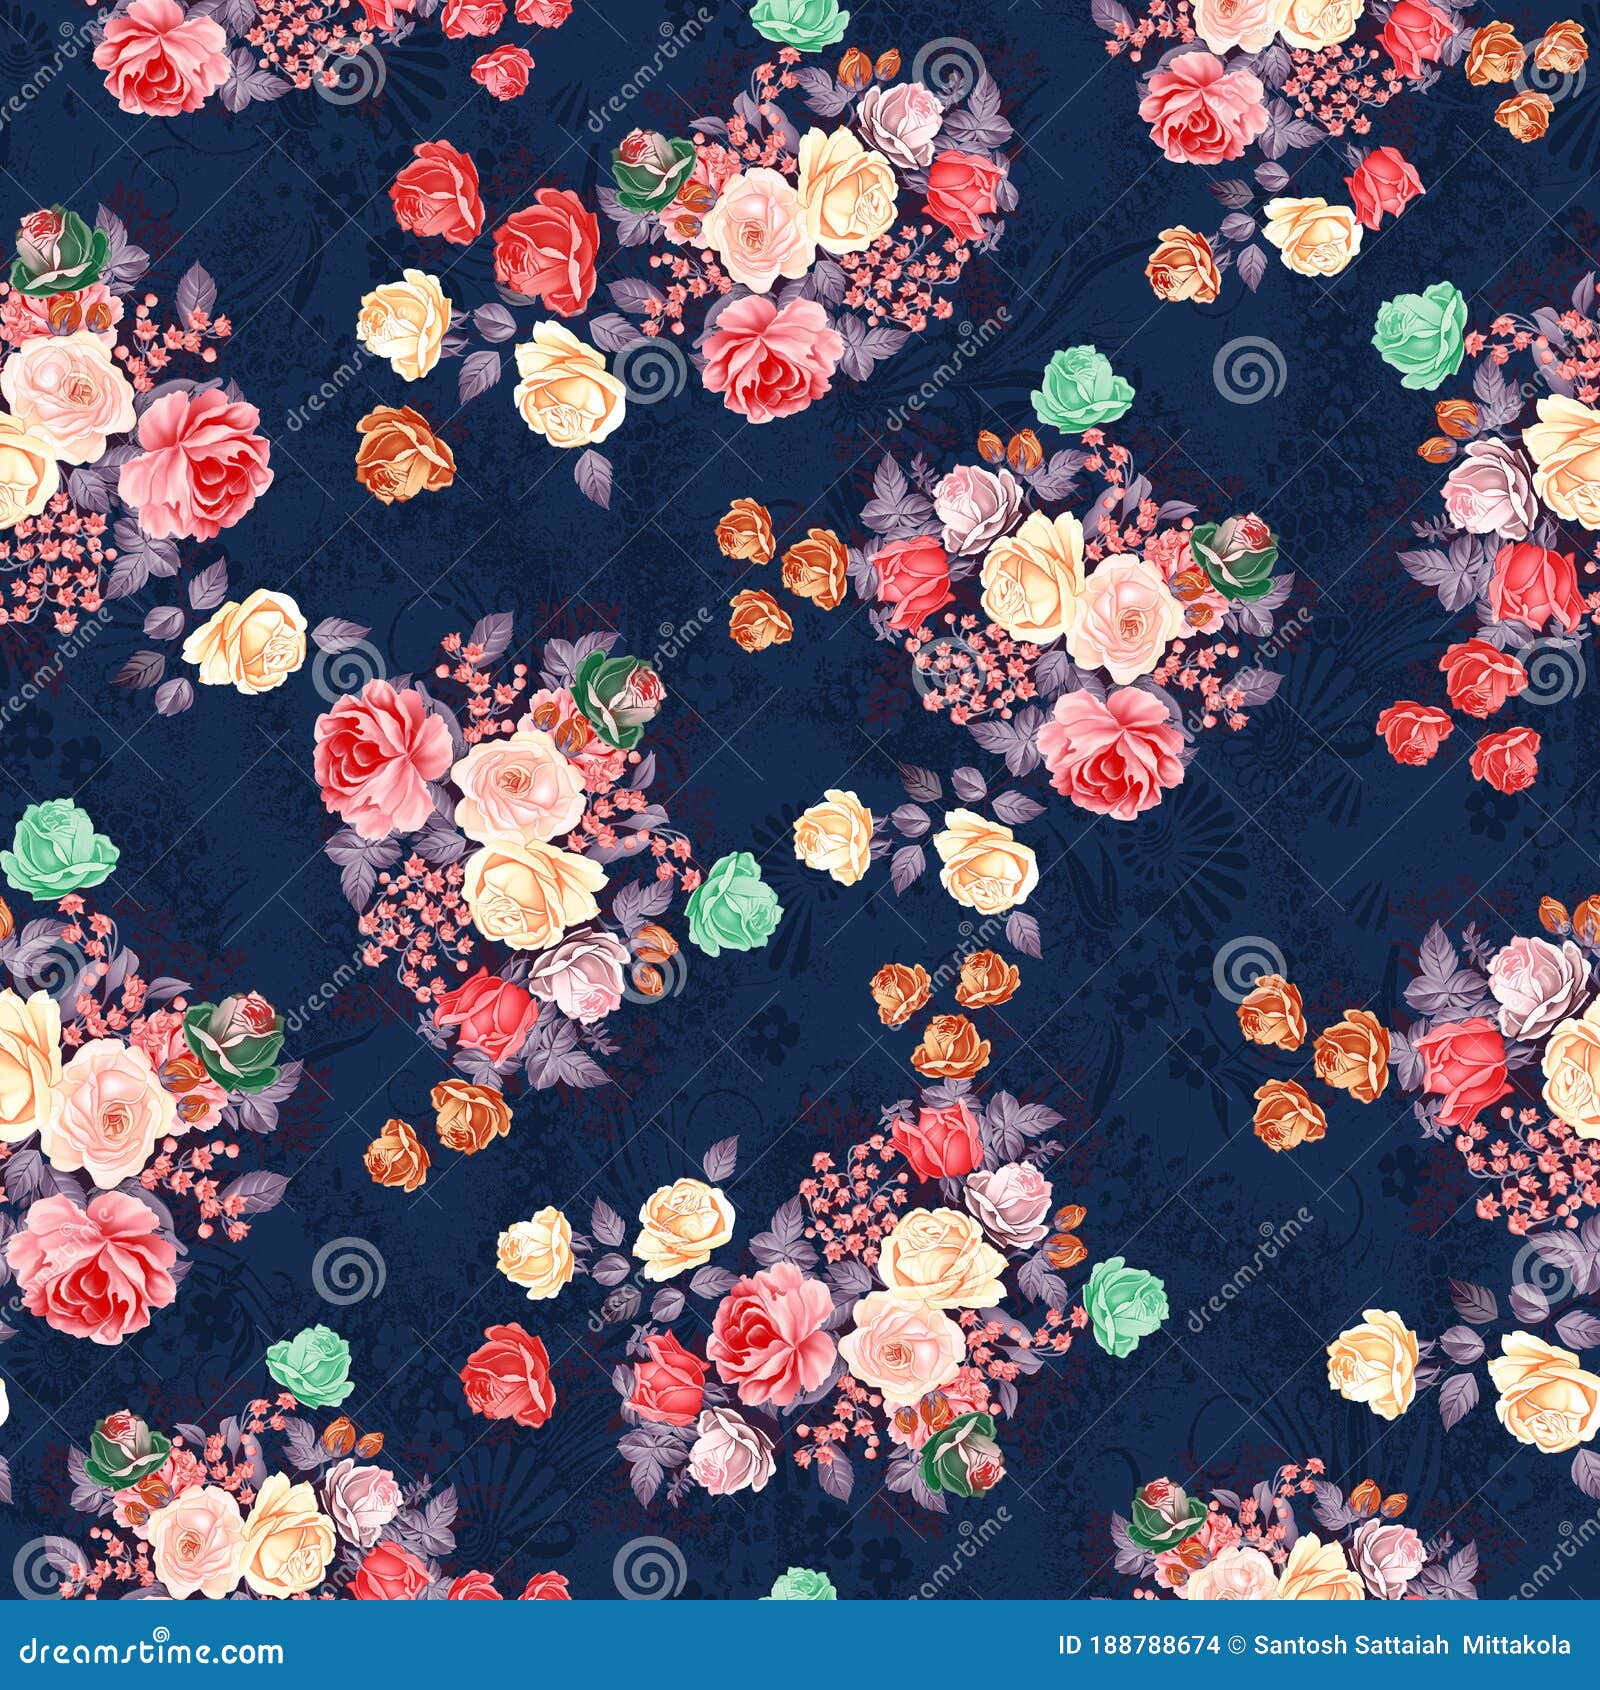 Cute Rose Flower Pattern Small Vintage Flower Bouquet With Navy Background Stock Illustration Illustration Of Blossom Bouquet 188788674